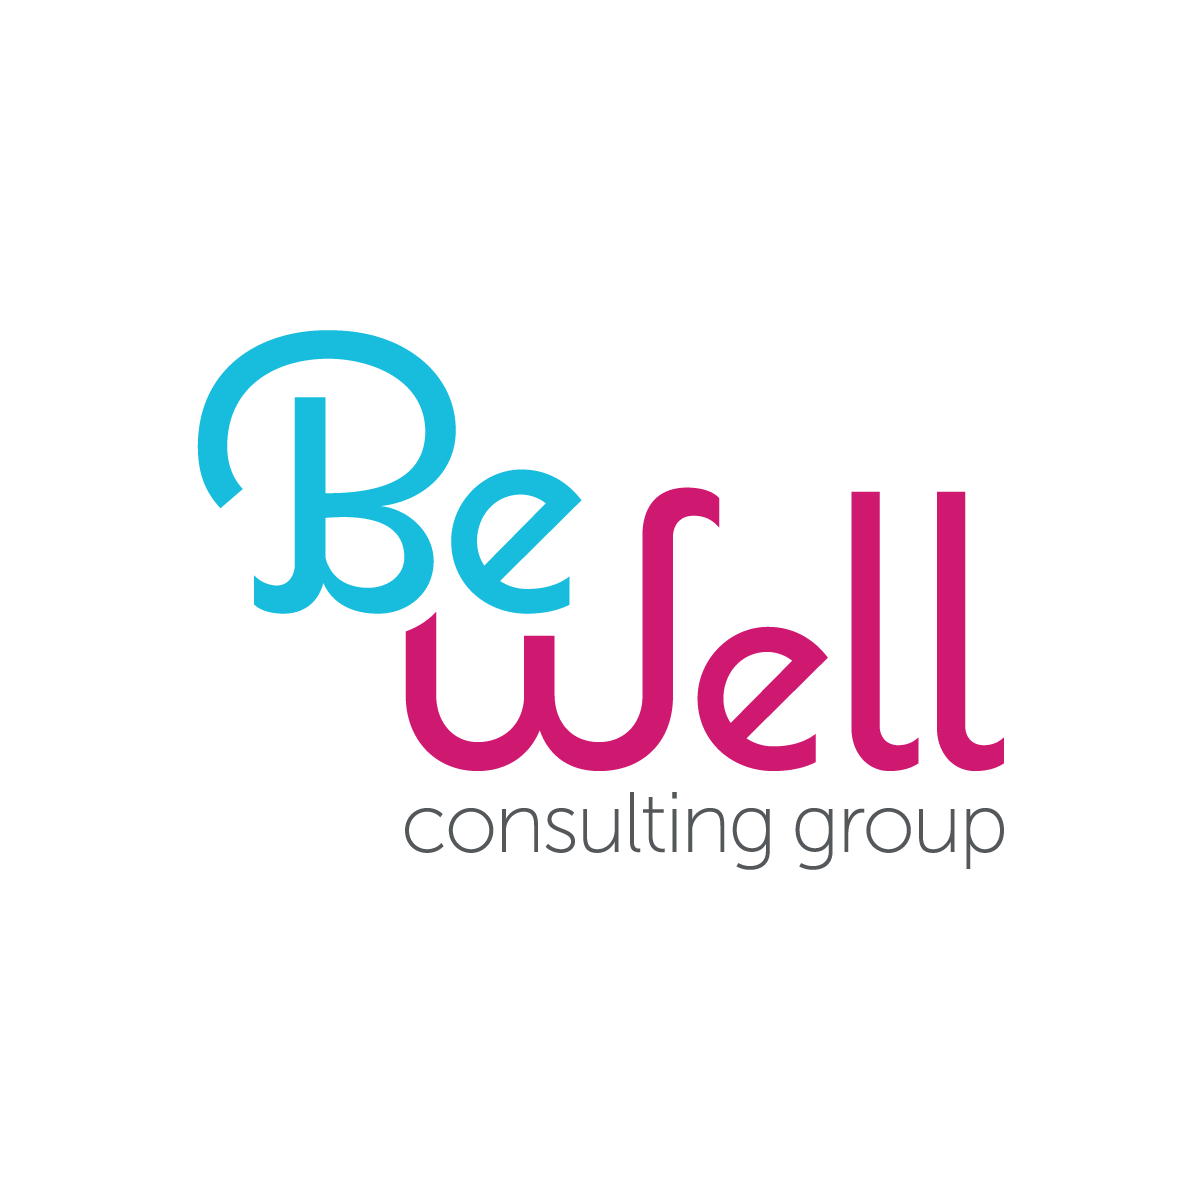 Be Well Consulting Group